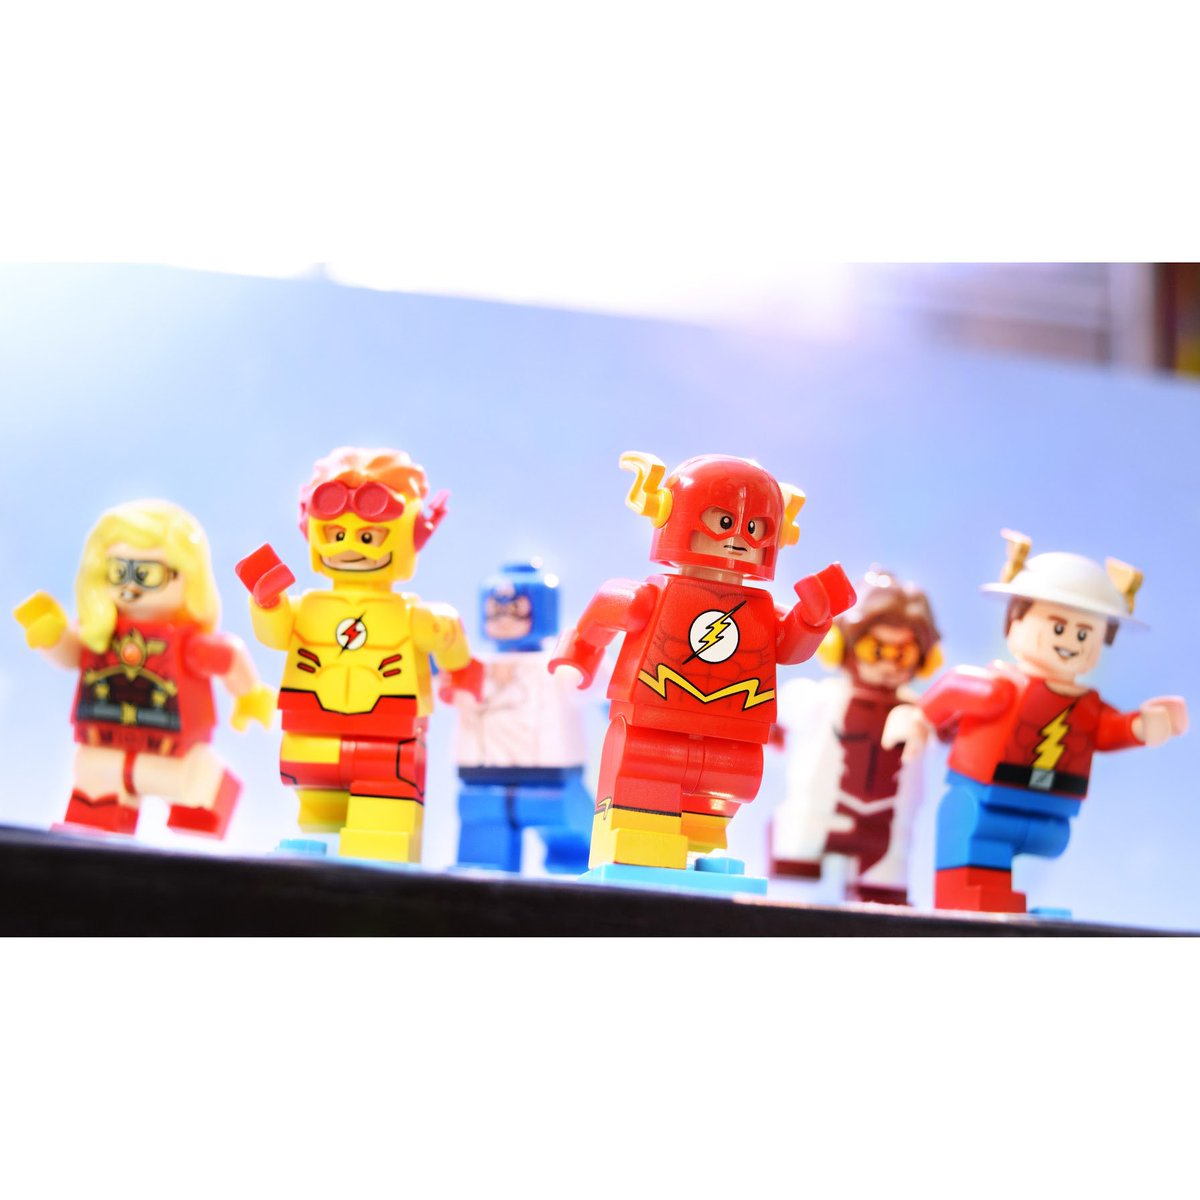 Andrew Cookston Photography on Twitter: "This inspired by an old piece from #TheFlash (the first one from 2009 or whatever) — #Lego #DC #LegoDC #LegoFlash #CustomMinifig #Christo7108 #FunnyBrick #DiamondBrick #